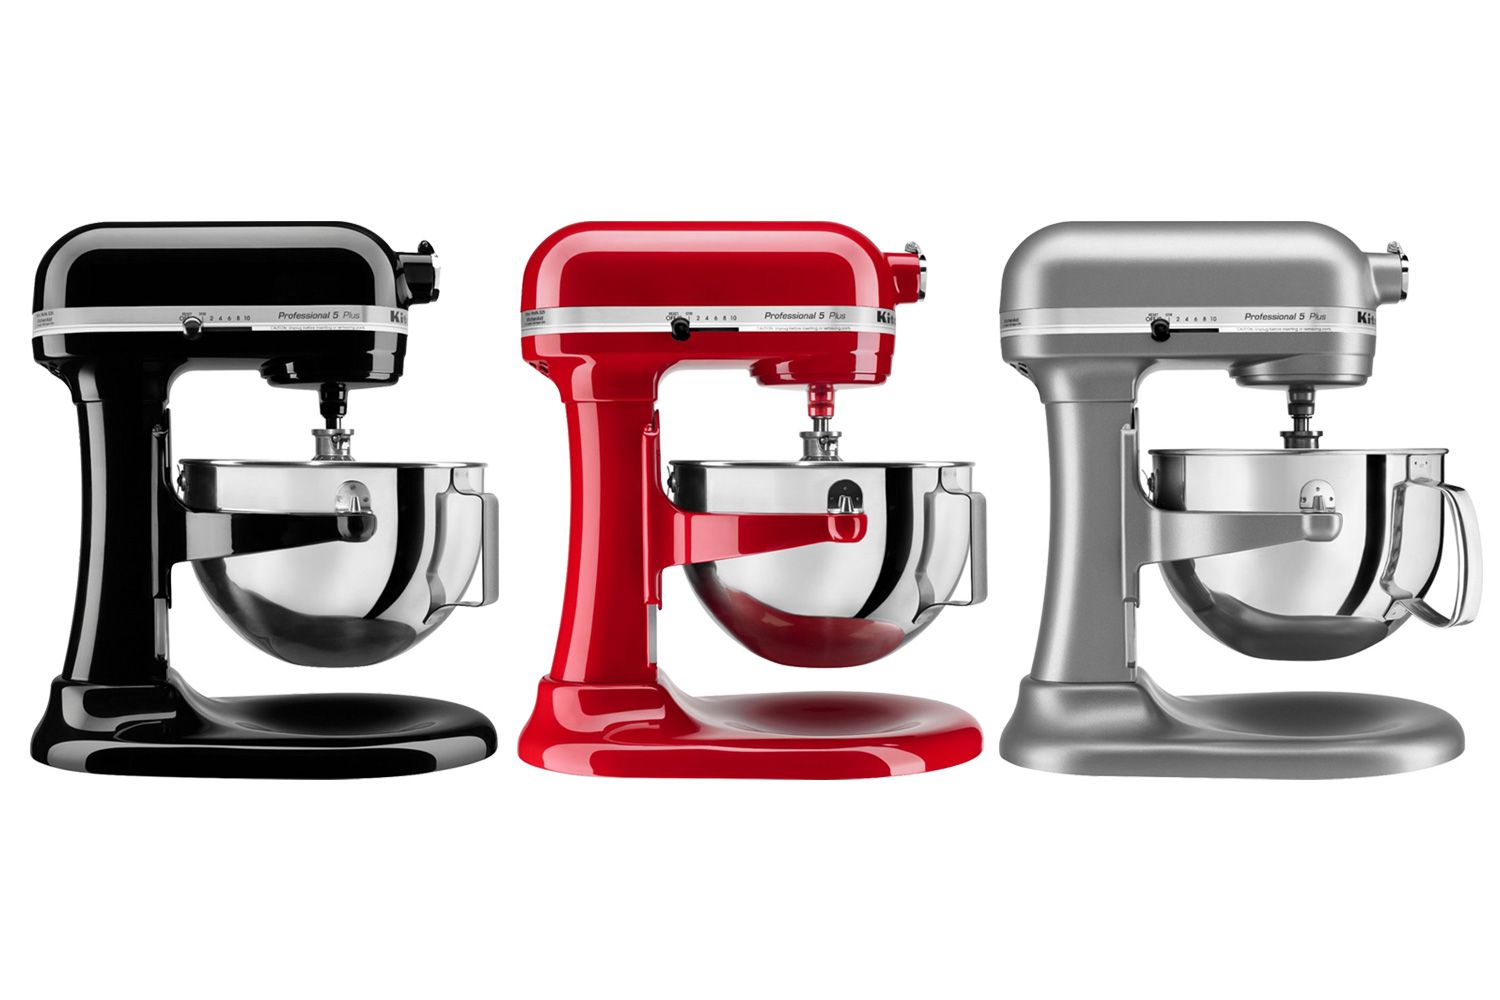 Best Buy Launches 20 Off KitchenAid Stand Mixer Sale   PEOPLE.com